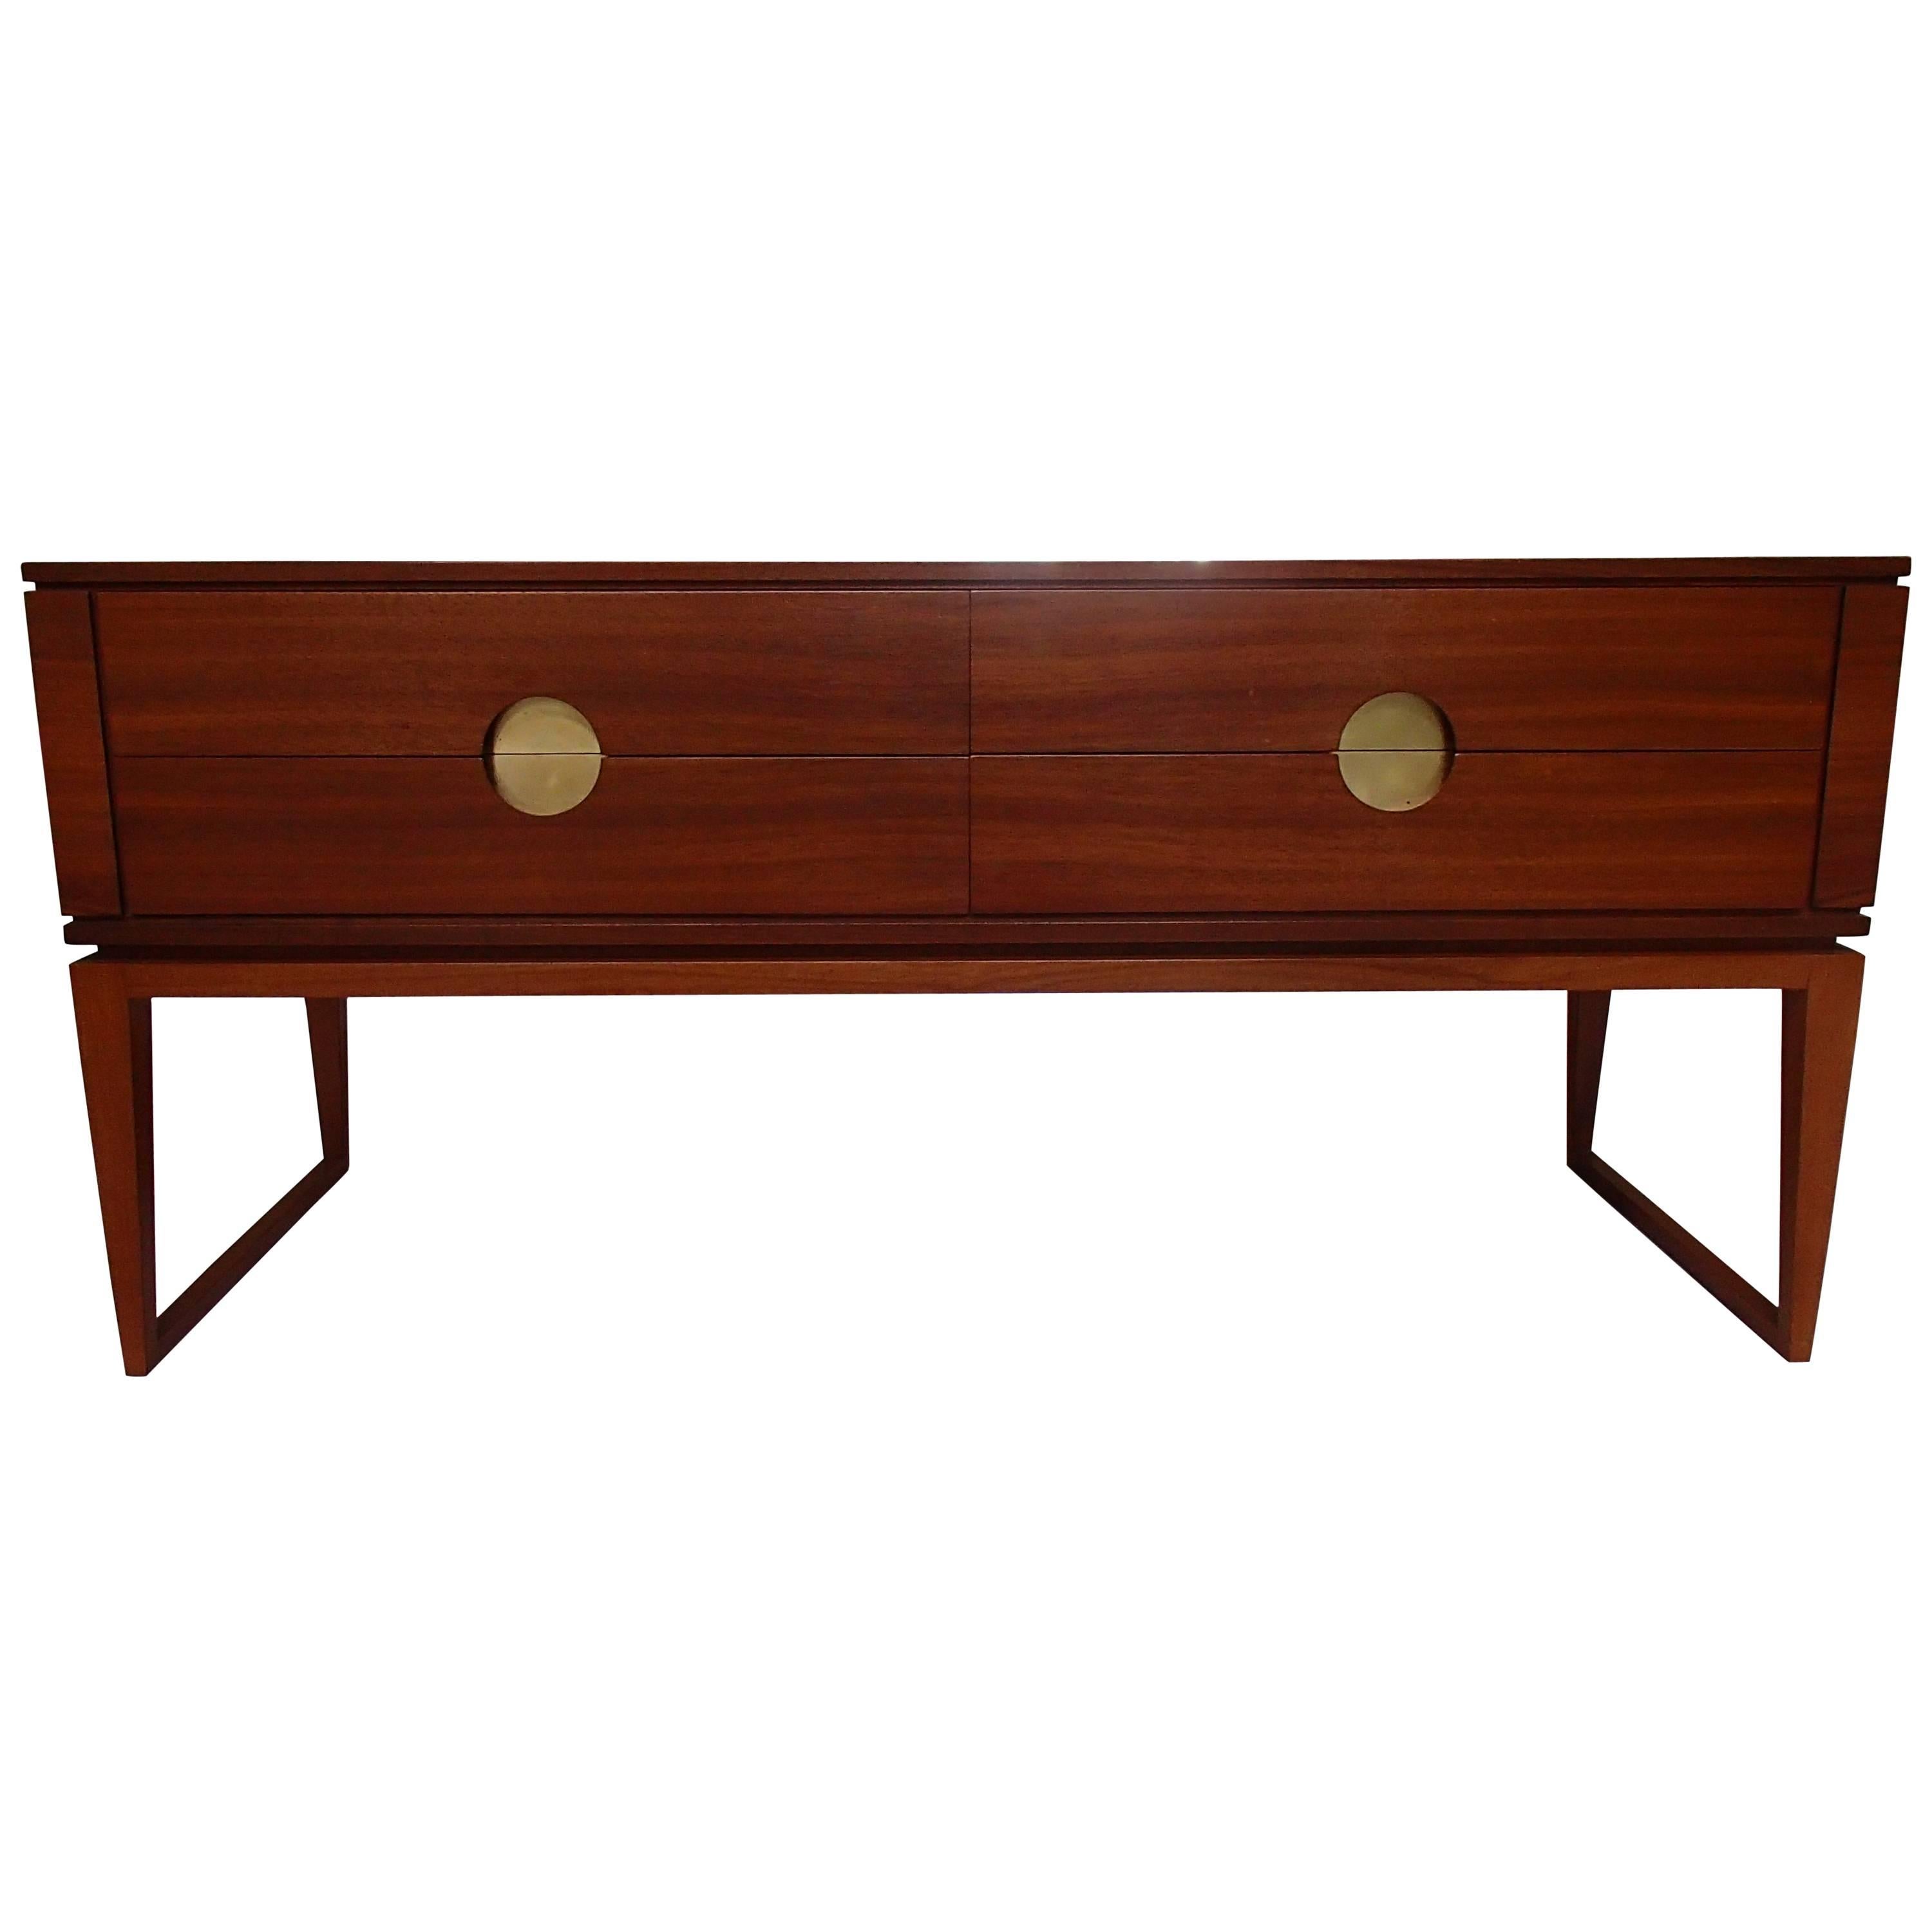 Mid century modern low board 4 drawers cherry wood and brass handels